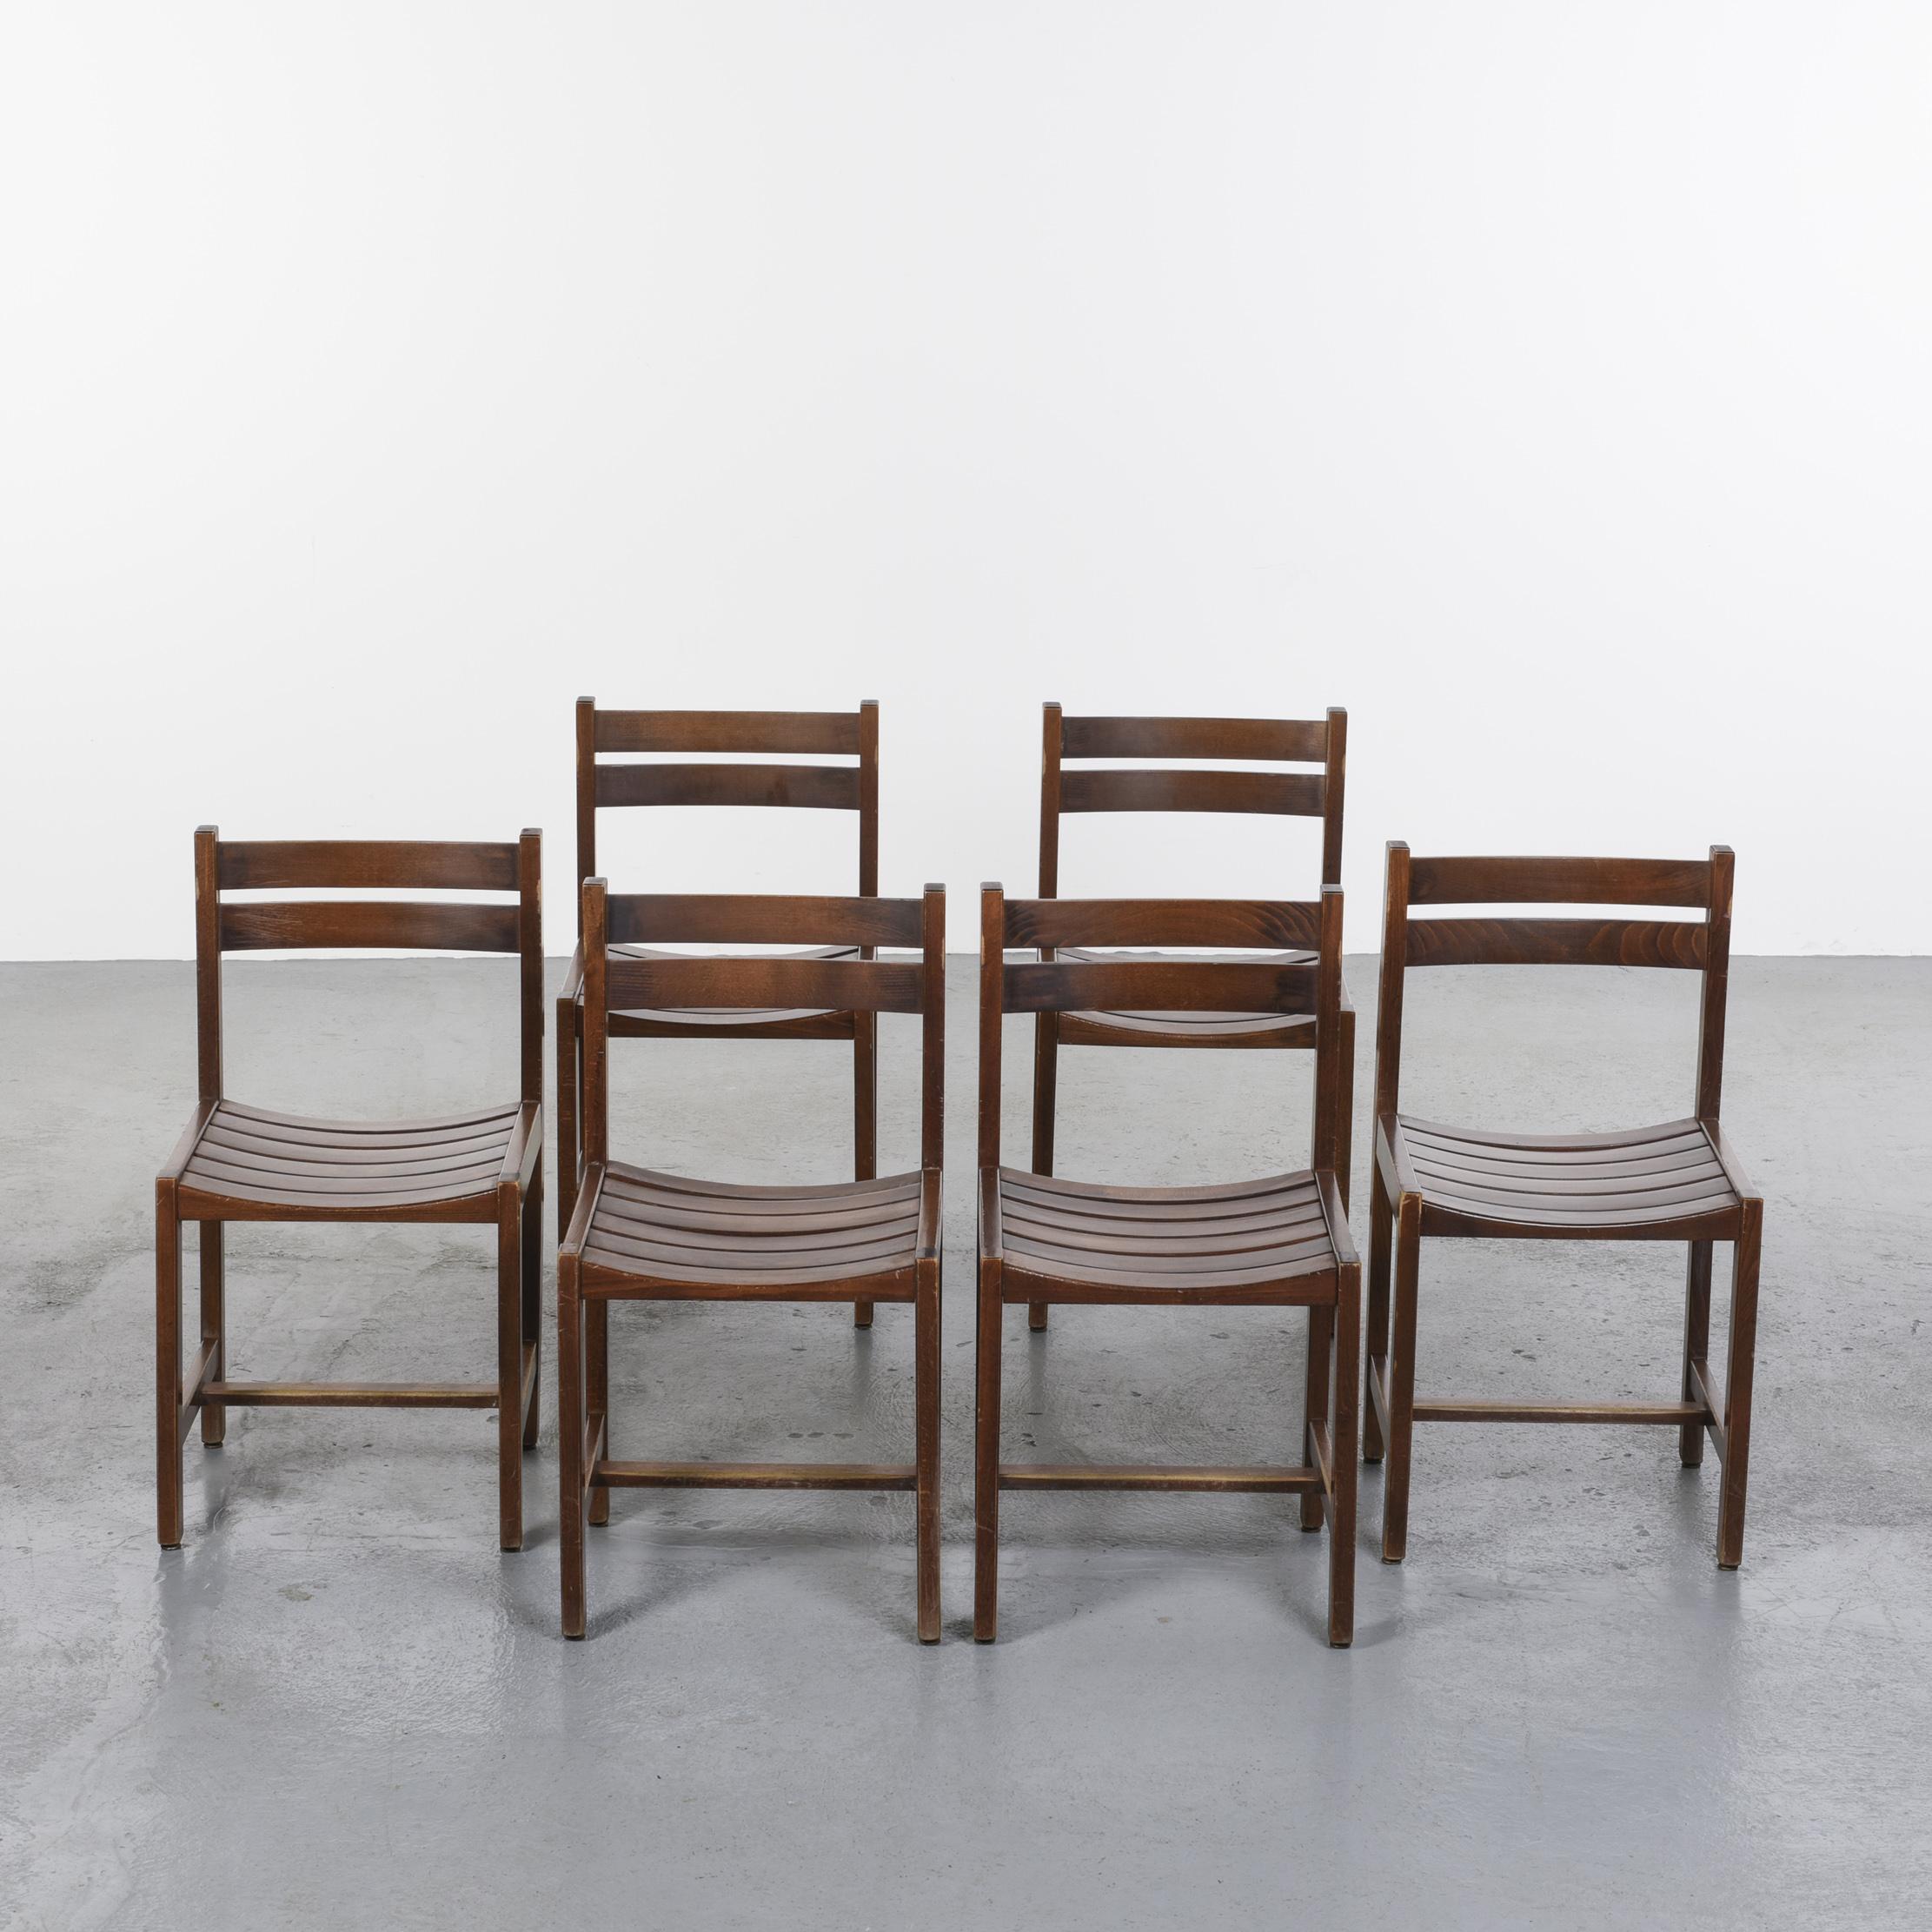 Quite typical of the French Reconstruction period, this set of six solid mahogany chairs were designed by André Sornay, French Decorateur & Designer.

Sleek and simple design for a perfect seat.

Shipping worldwide, with love and care.